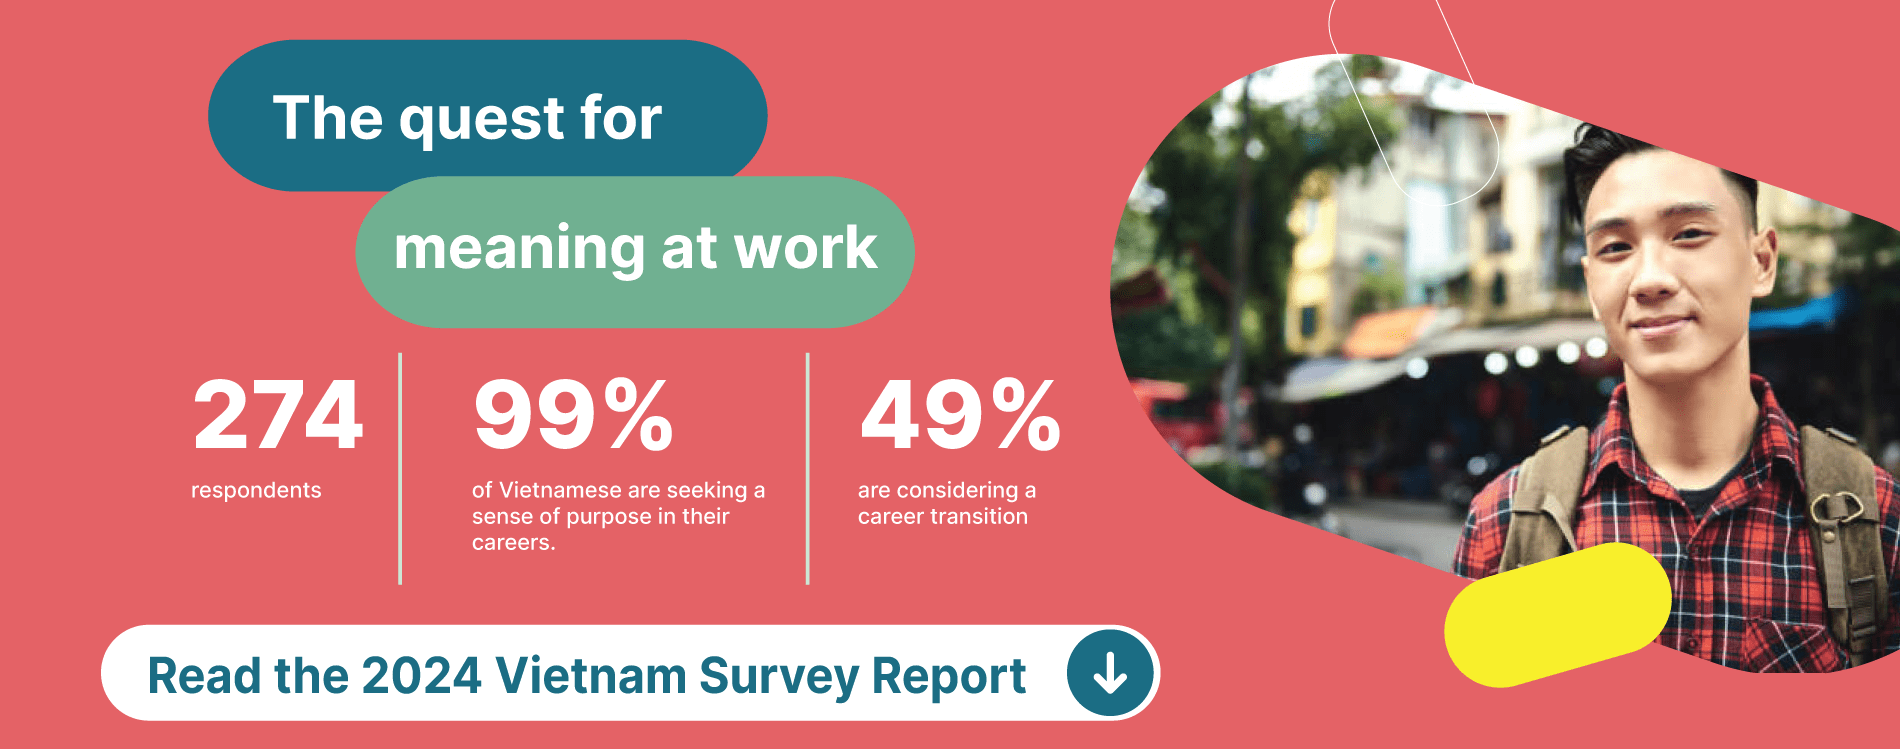 A Meaningful Work in Vietnam: Insights from Jo_coverbs_that_makesense and Manpower’s Survey